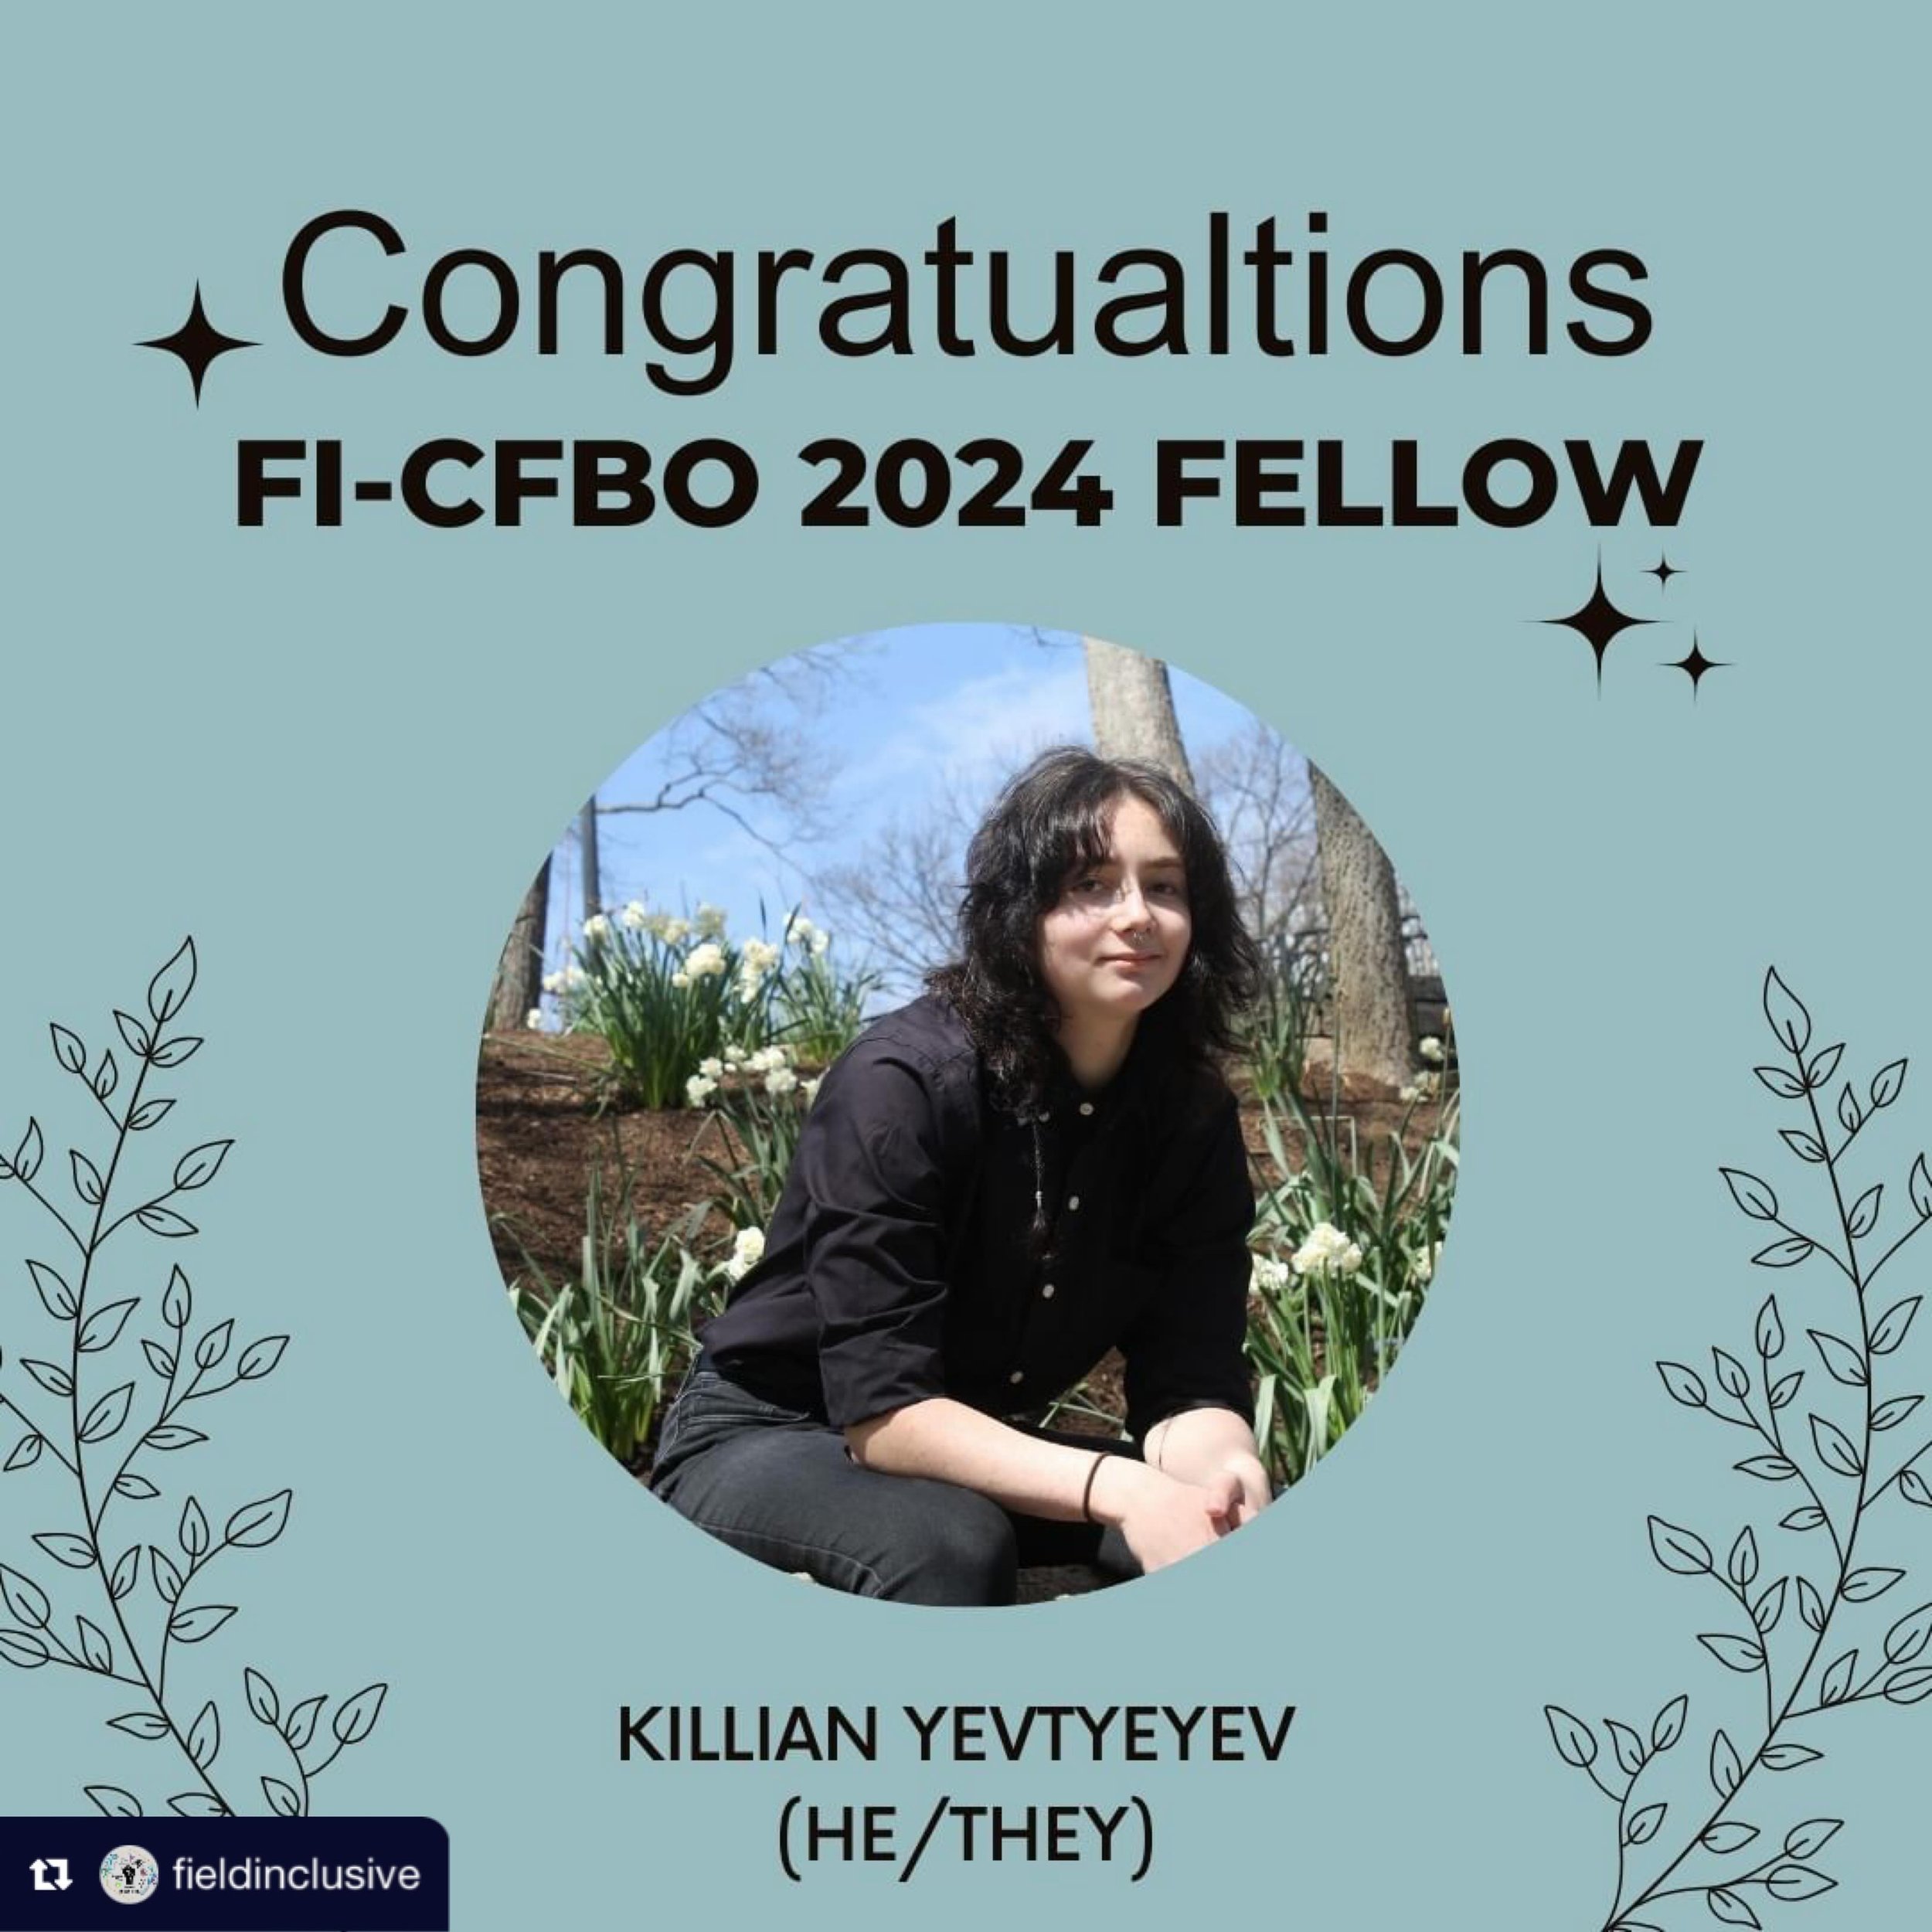 We are so excited to have Killian with us this summer! #Repost from @fieldinclusive
&bull;
CONGRATULATIONS to our 2024 FI-CFBO Fellow, Killian Yevtyeyev!! 🎉

Killian (he/they), is an undergraduate biology major at Ohio State University. Killian will